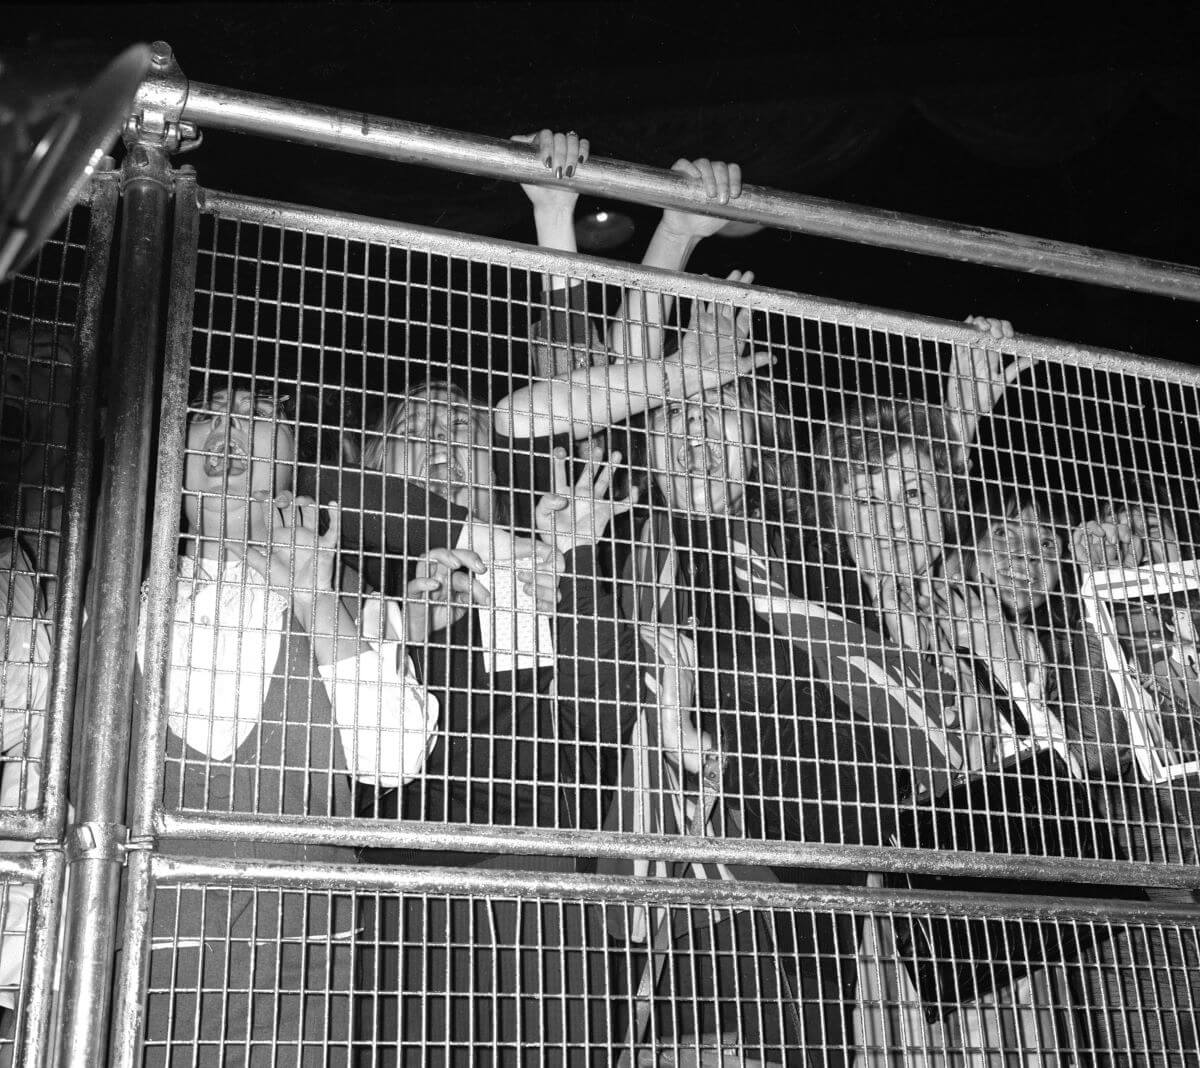 A black and white picture of Beatles fans pressing against a gate during a concert.